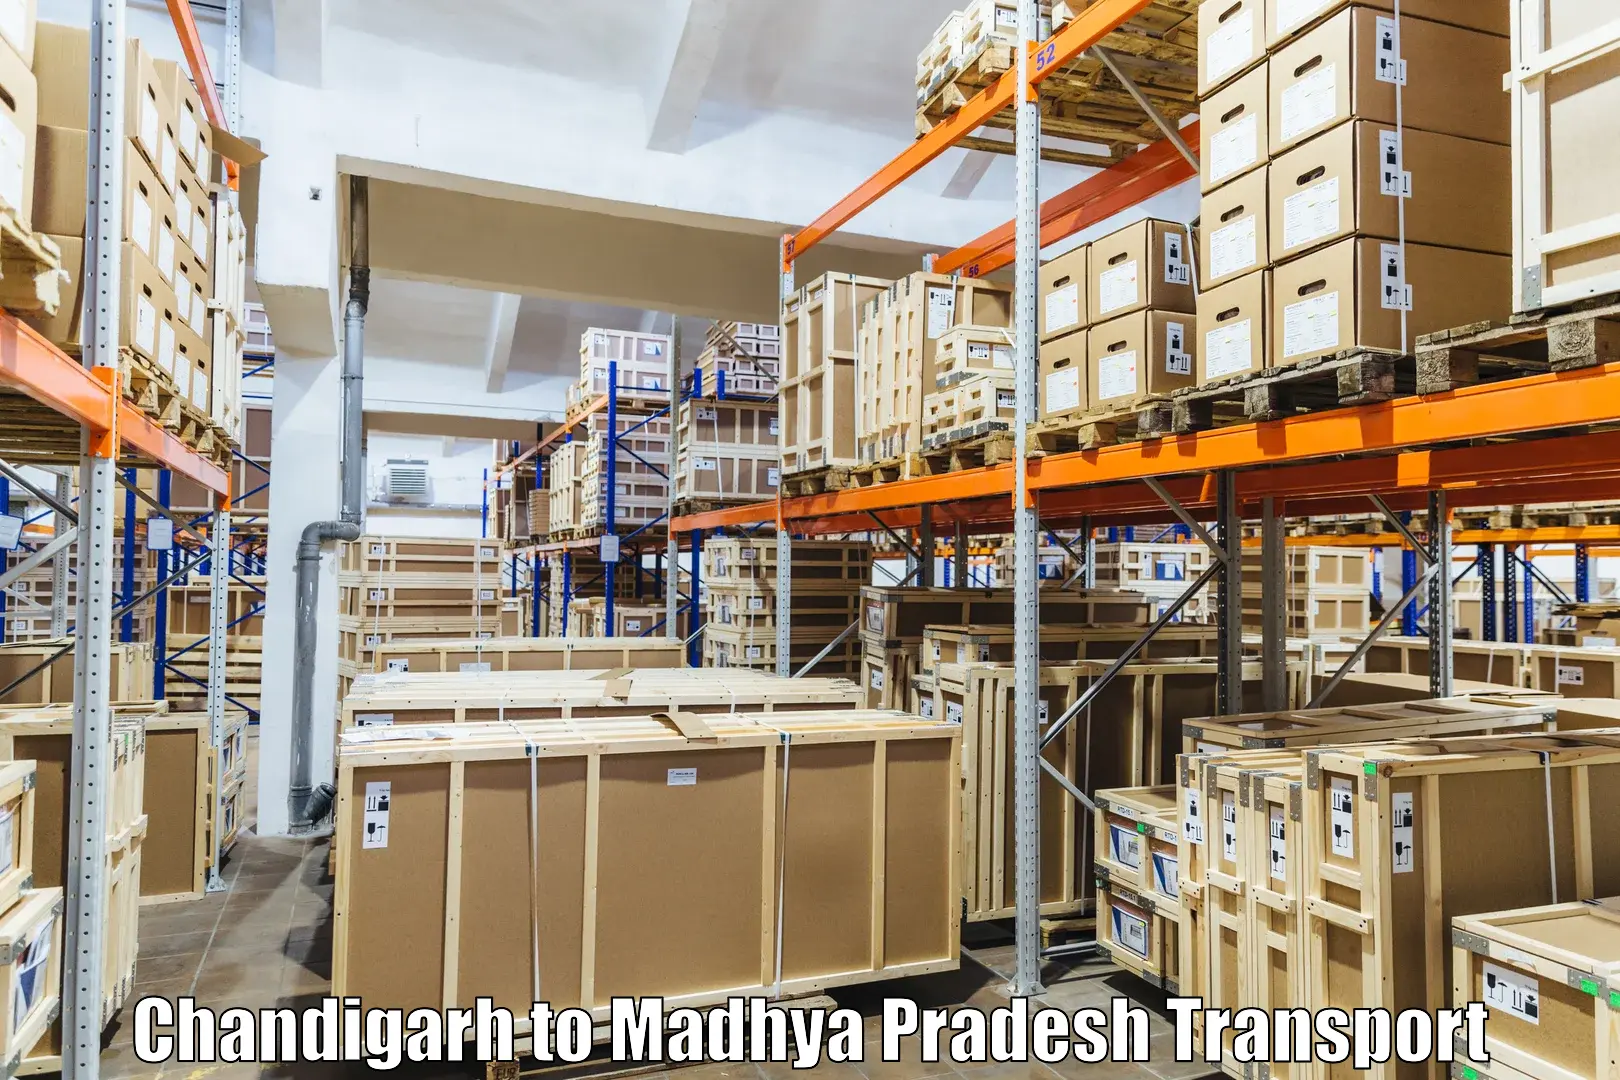 Air freight transport services Chandigarh to Budaganj